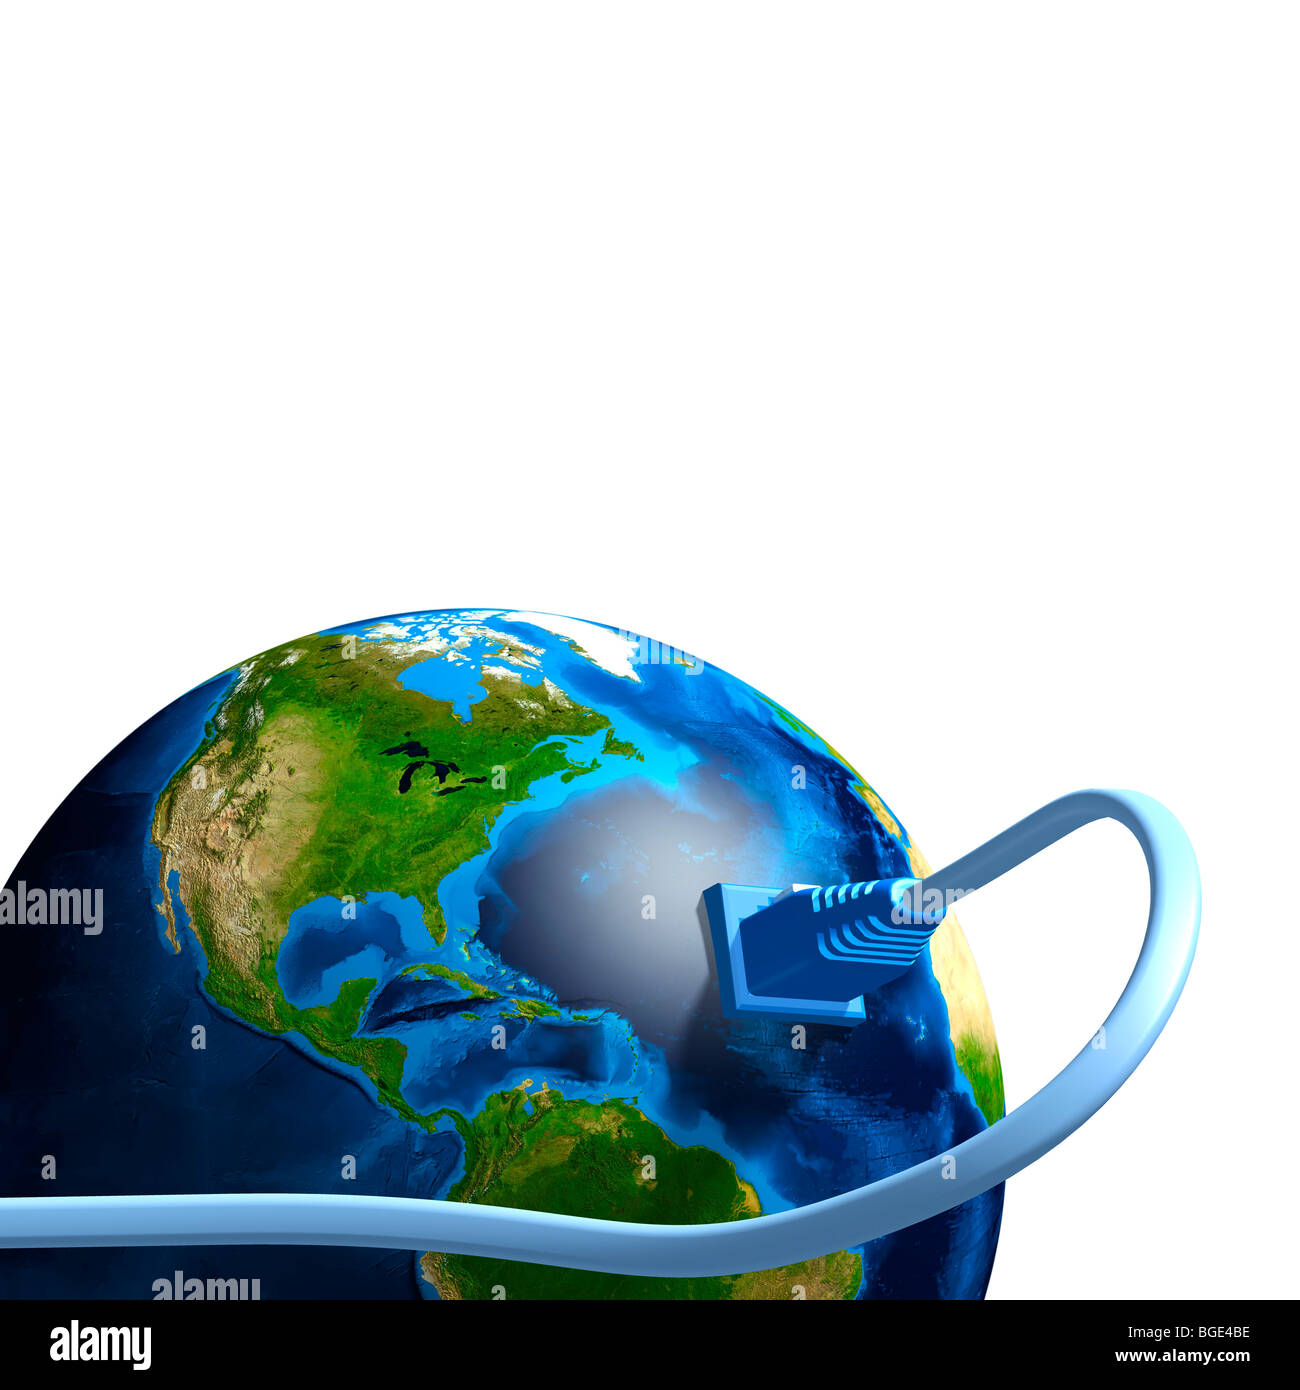 Network cable plugged into the Earth globe. Conceptual 3D illustration. Stock Photo